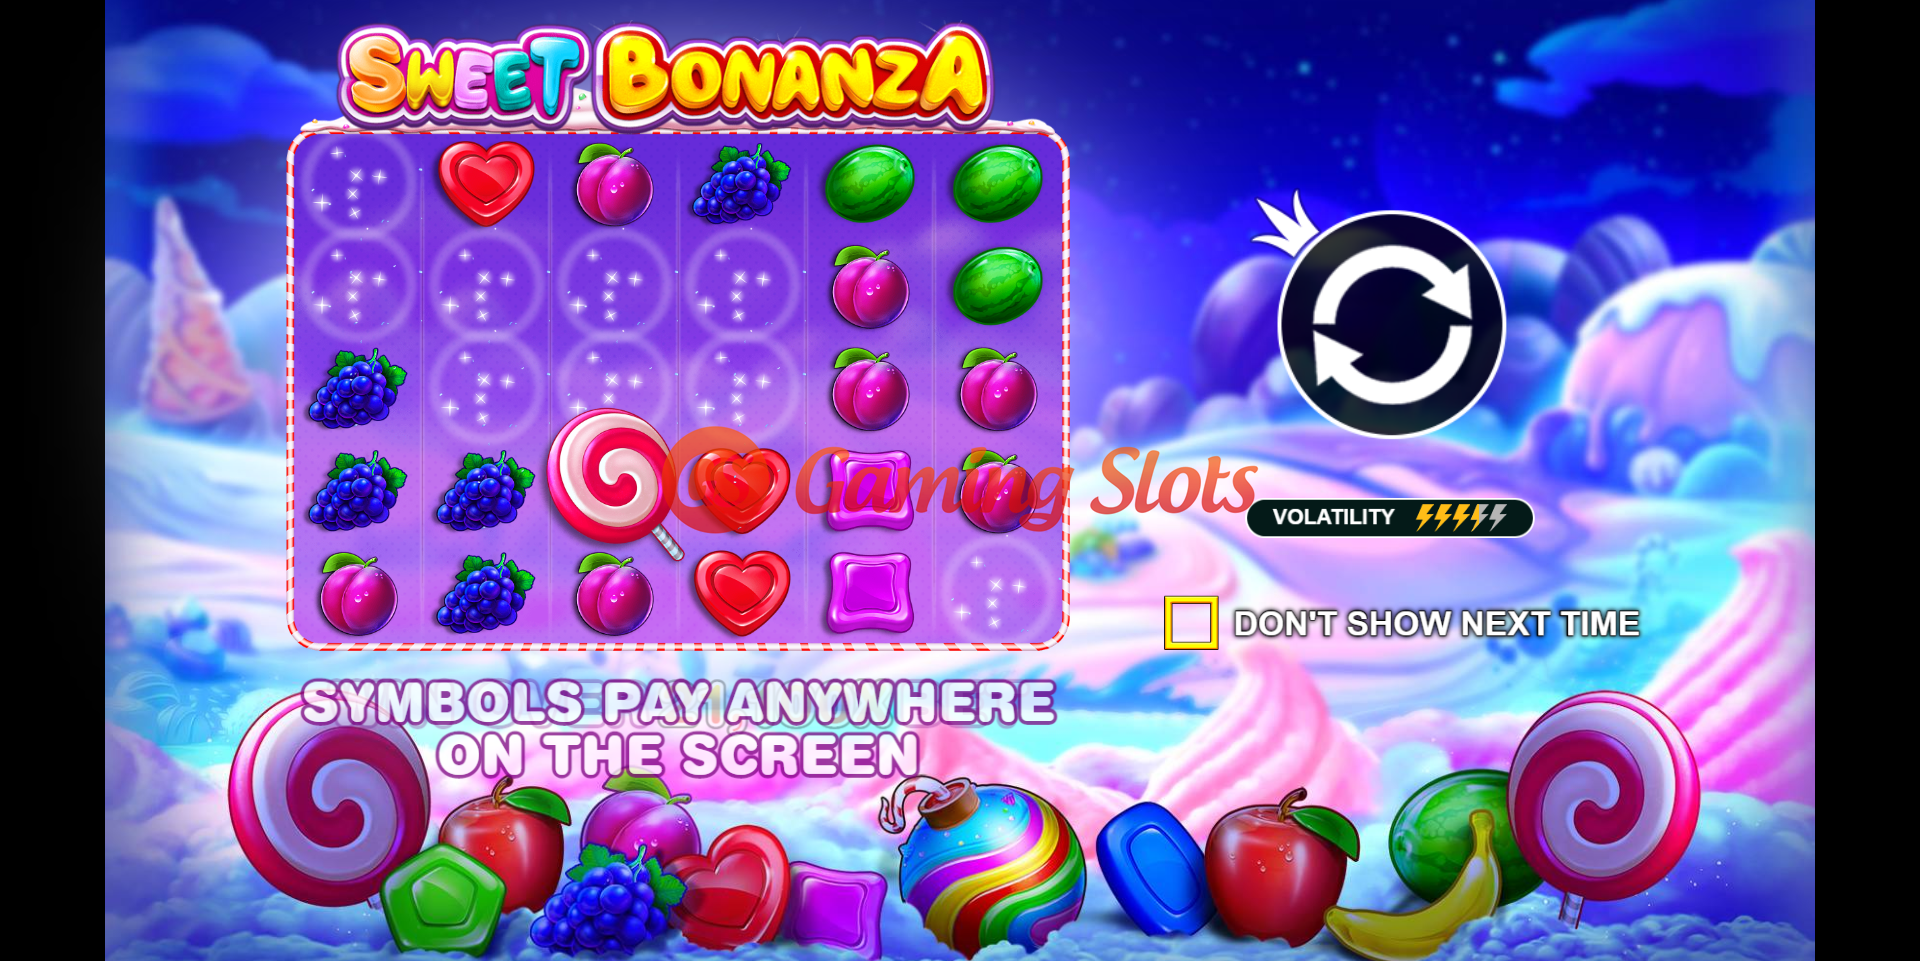 Game Intro for Sweet Bonanza slot from Pragmatic Play